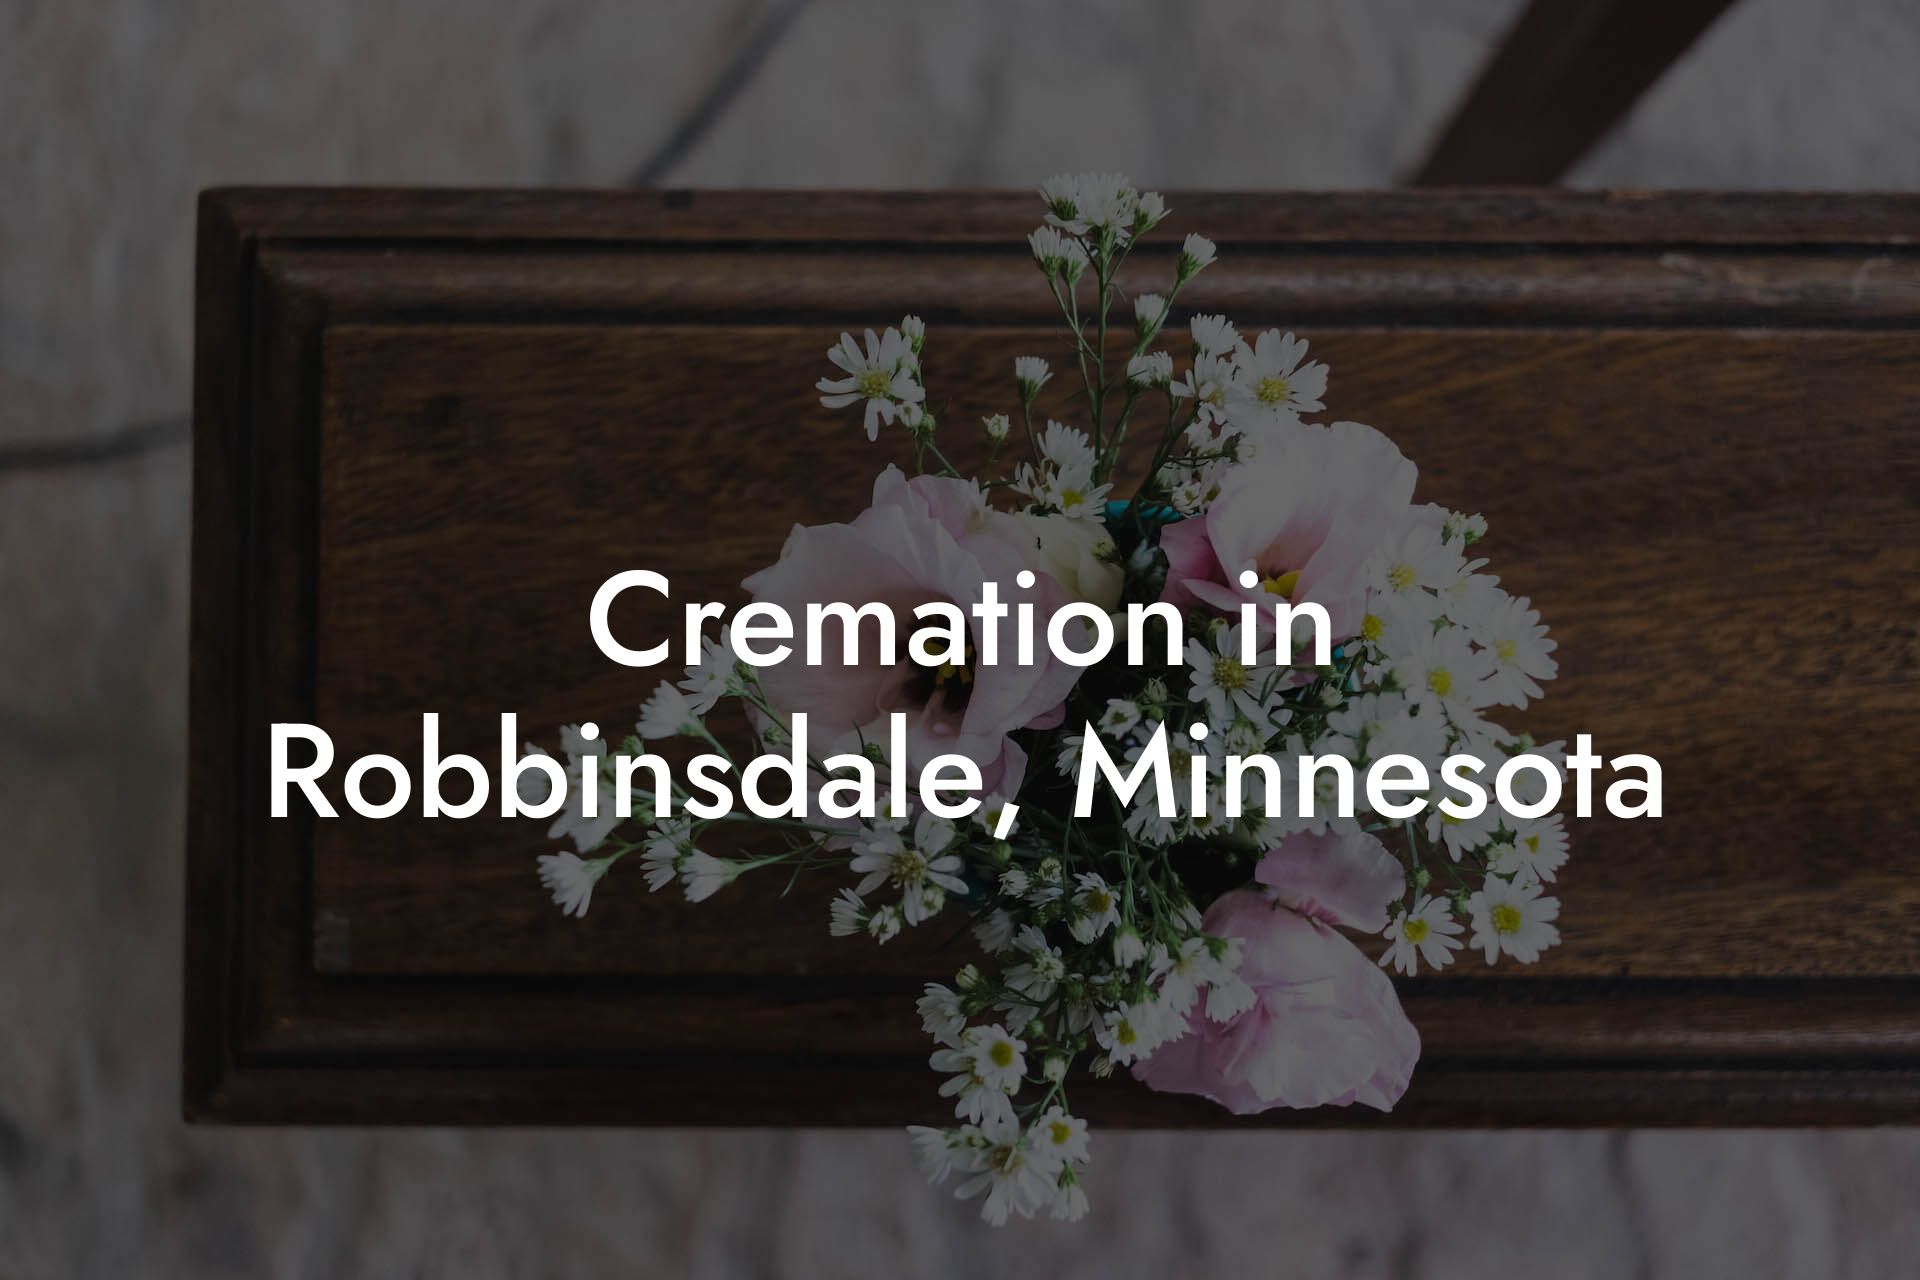 Cremation in Robbinsdale, Minnesota